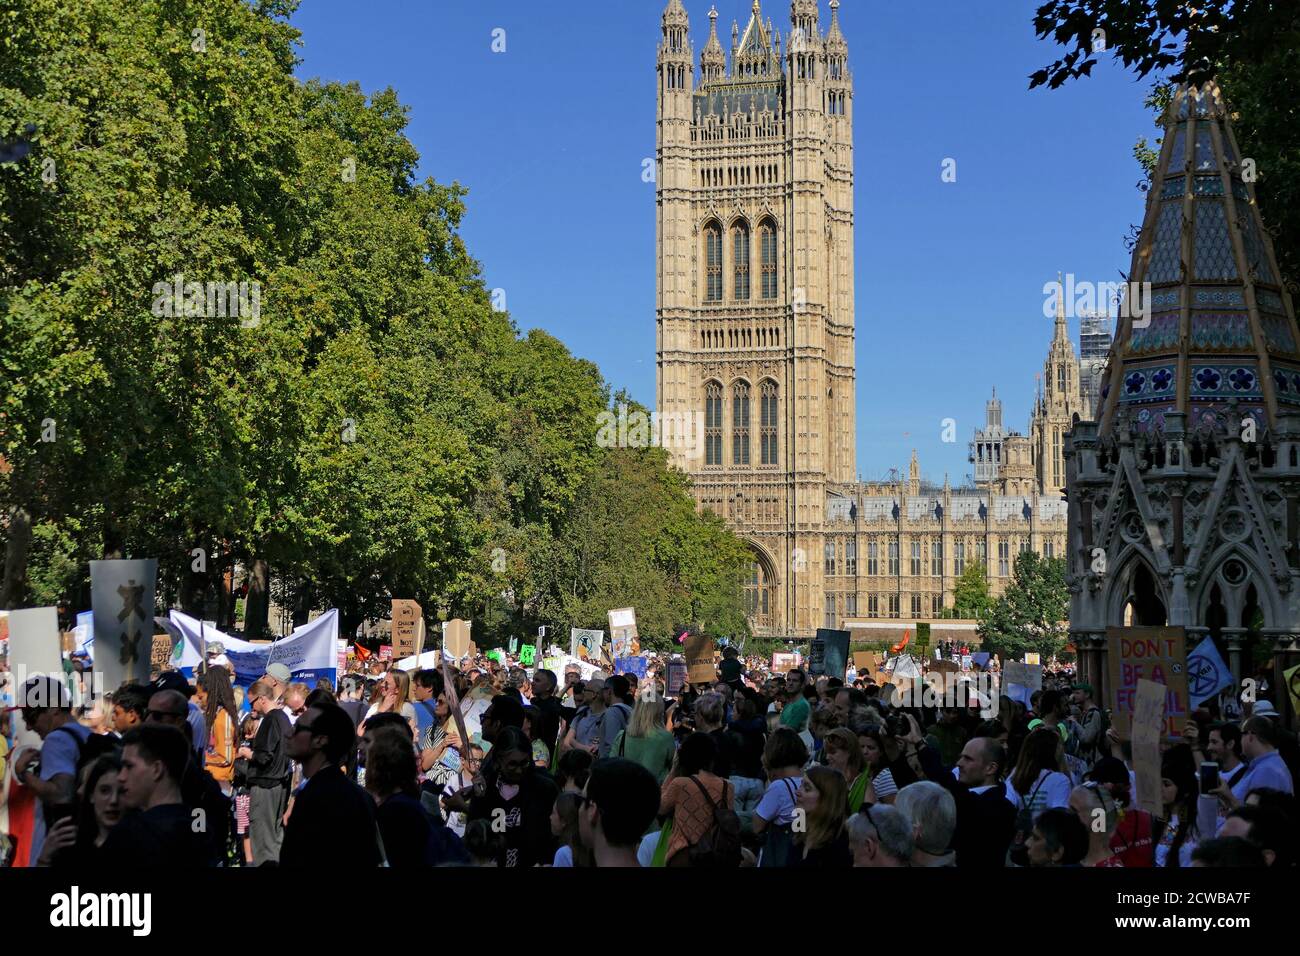 Protesters at a rally at Victoria Park, near Parliament, London, during the 20th September 2019 climate strike. Also known as the Global Week for Future, a series of international strikes and protests to demand action be taken to address climate change. The 20 September protests were likely the largest climate strikes in world history. Organisers reported that over 4 million people participated in strikes worldwide, including 300000 people joined UK protests. Greta Thunberg, (born 3 January 2003), Swedish environmental activist, credited with raising global awareness of the risks posed by clim Stock Photo